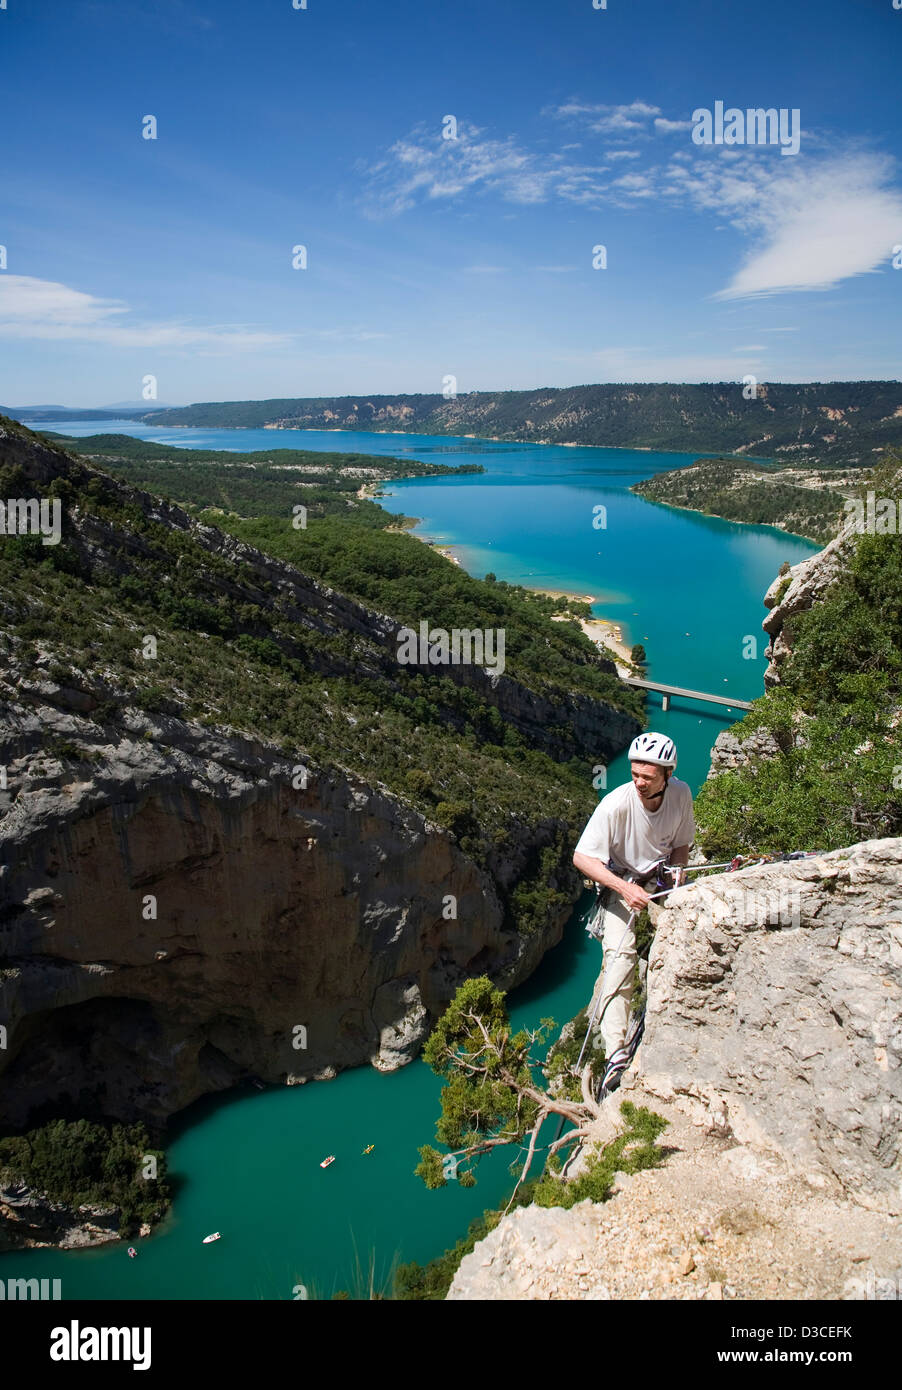 Rock-climber With View Of Lac De Sainte Croix In Background, Canyon Du Verdon, Provence, France, Europe Stock Photo